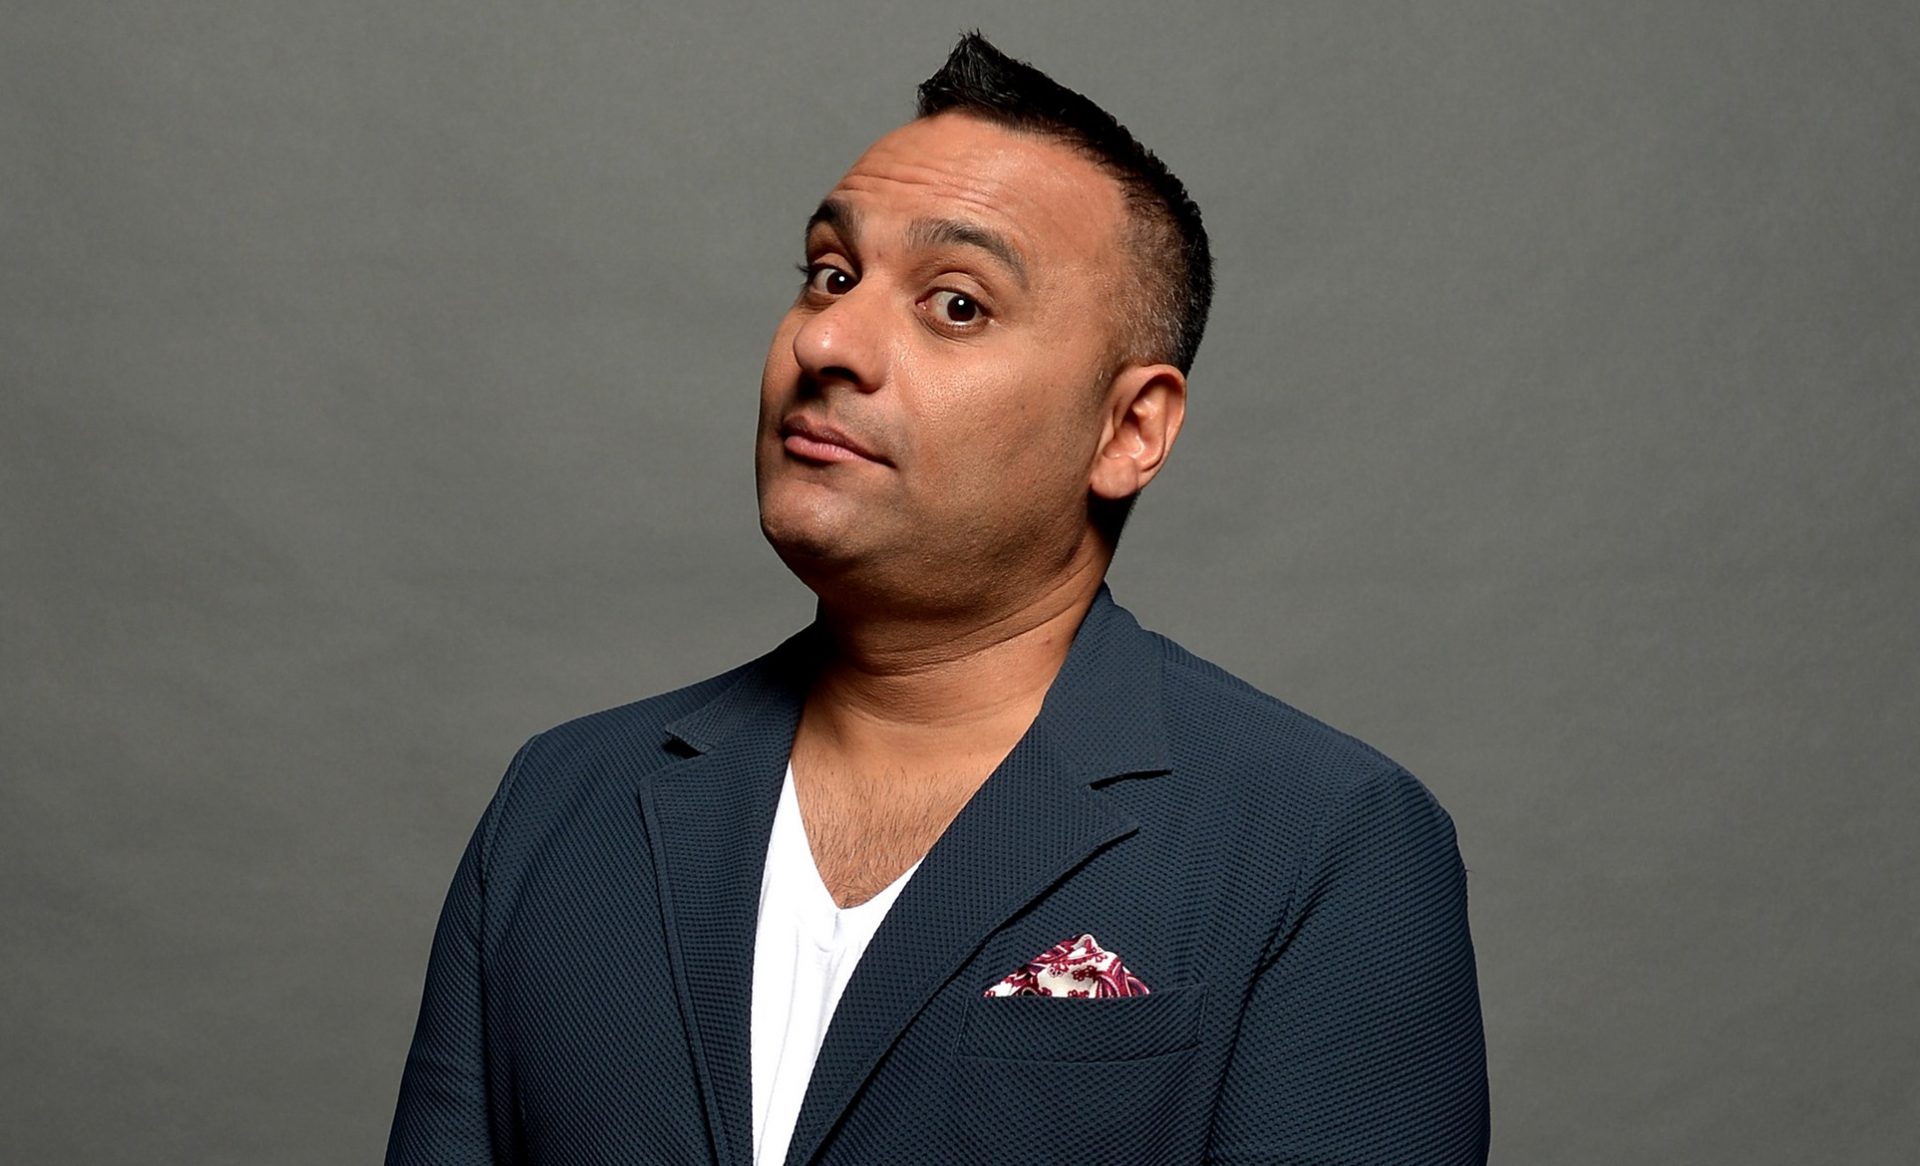 Russell Peters Family Pictures, Wife, Daughter, Parents, Age